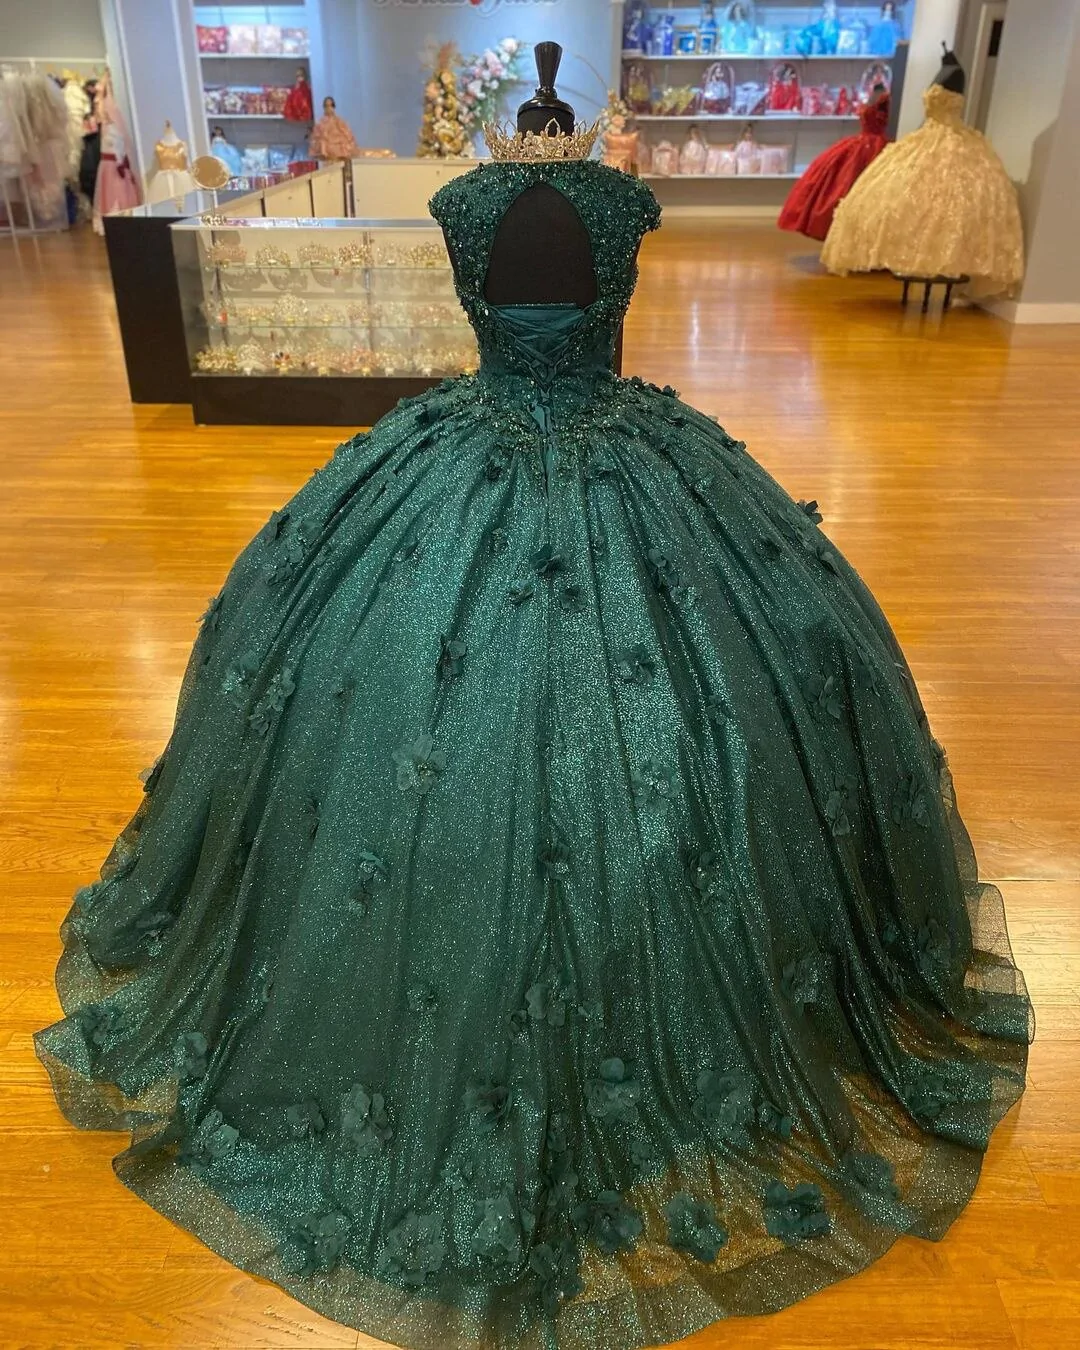 Green Princess Ball Gown Quinceanera Dresses Sweet 15 Party 3D Flowers Lace Applique Crystal Beads Sequin Birthday Gown